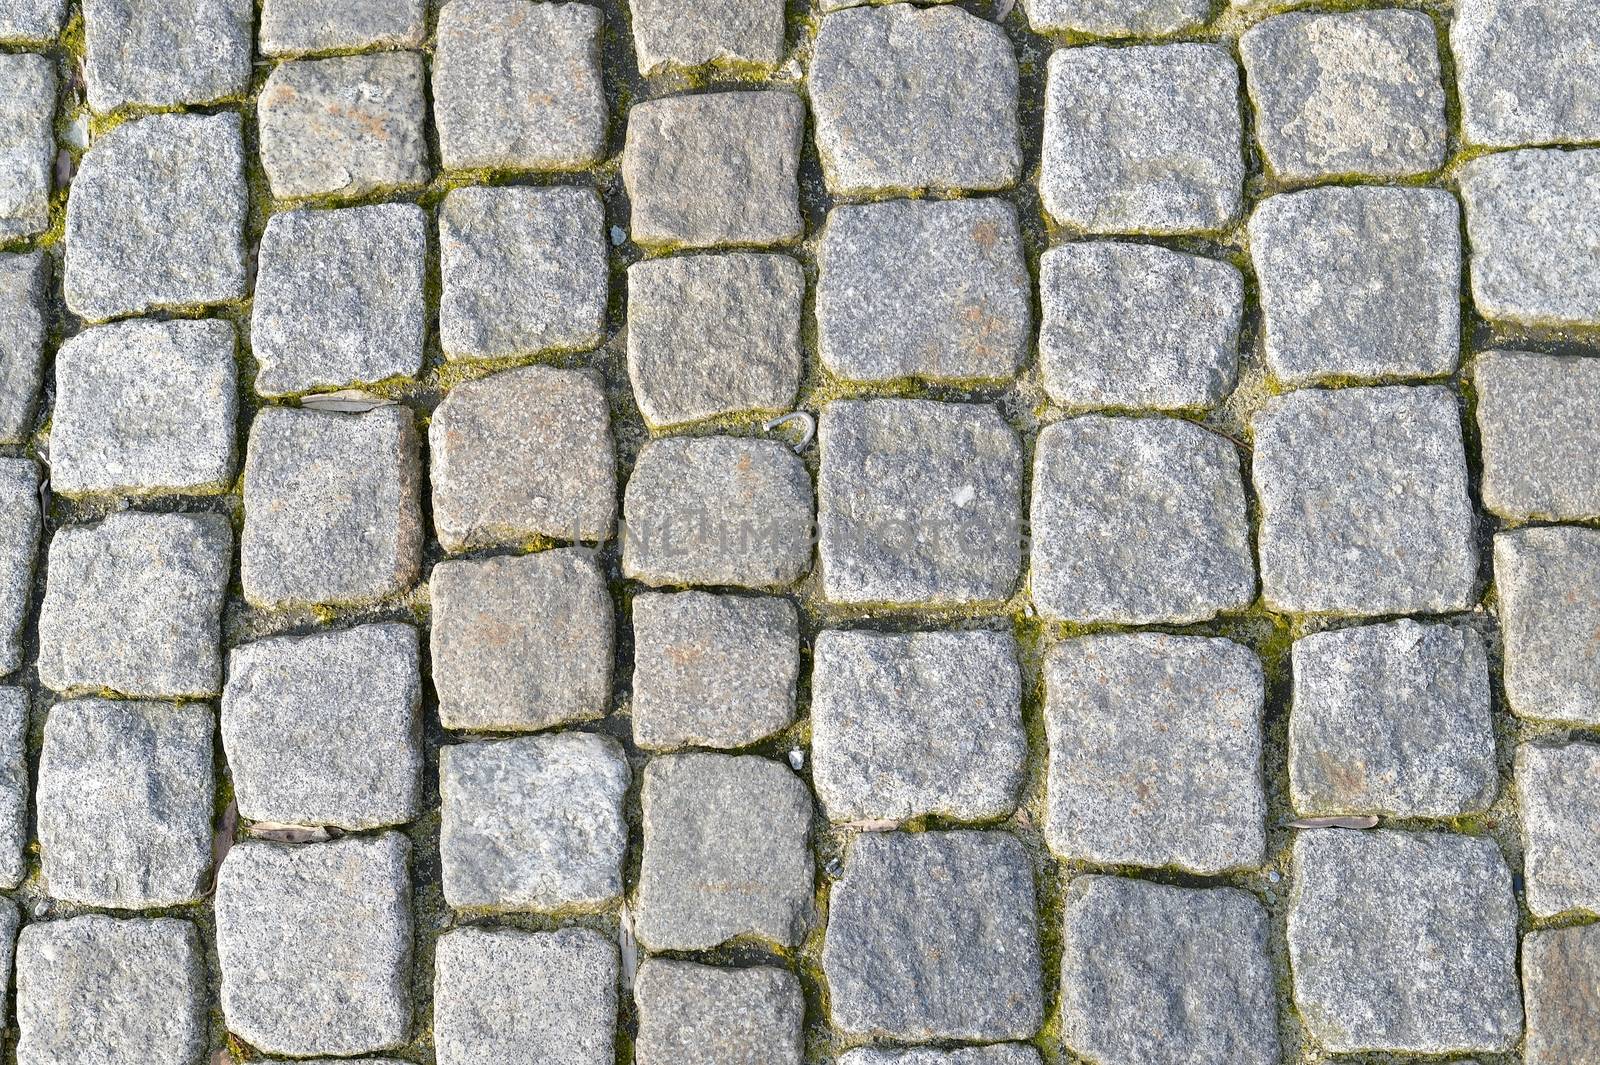 Traditional Cobbled Pavement Stavanger Norway by Whiteboxmedia